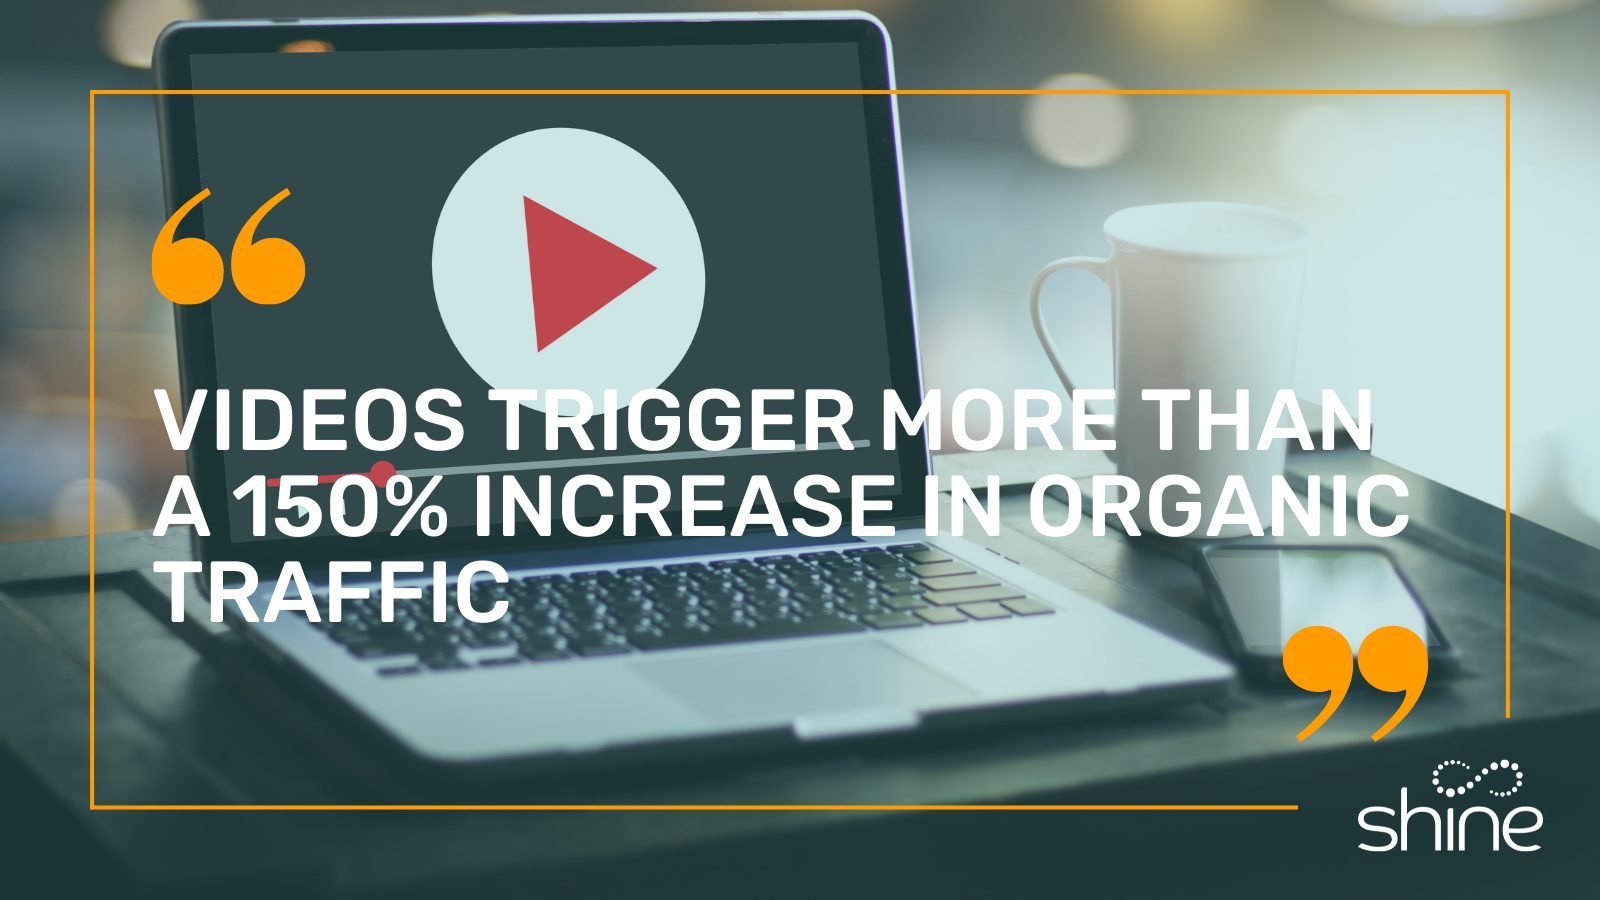 text on how videos increase organic traffic over 150%